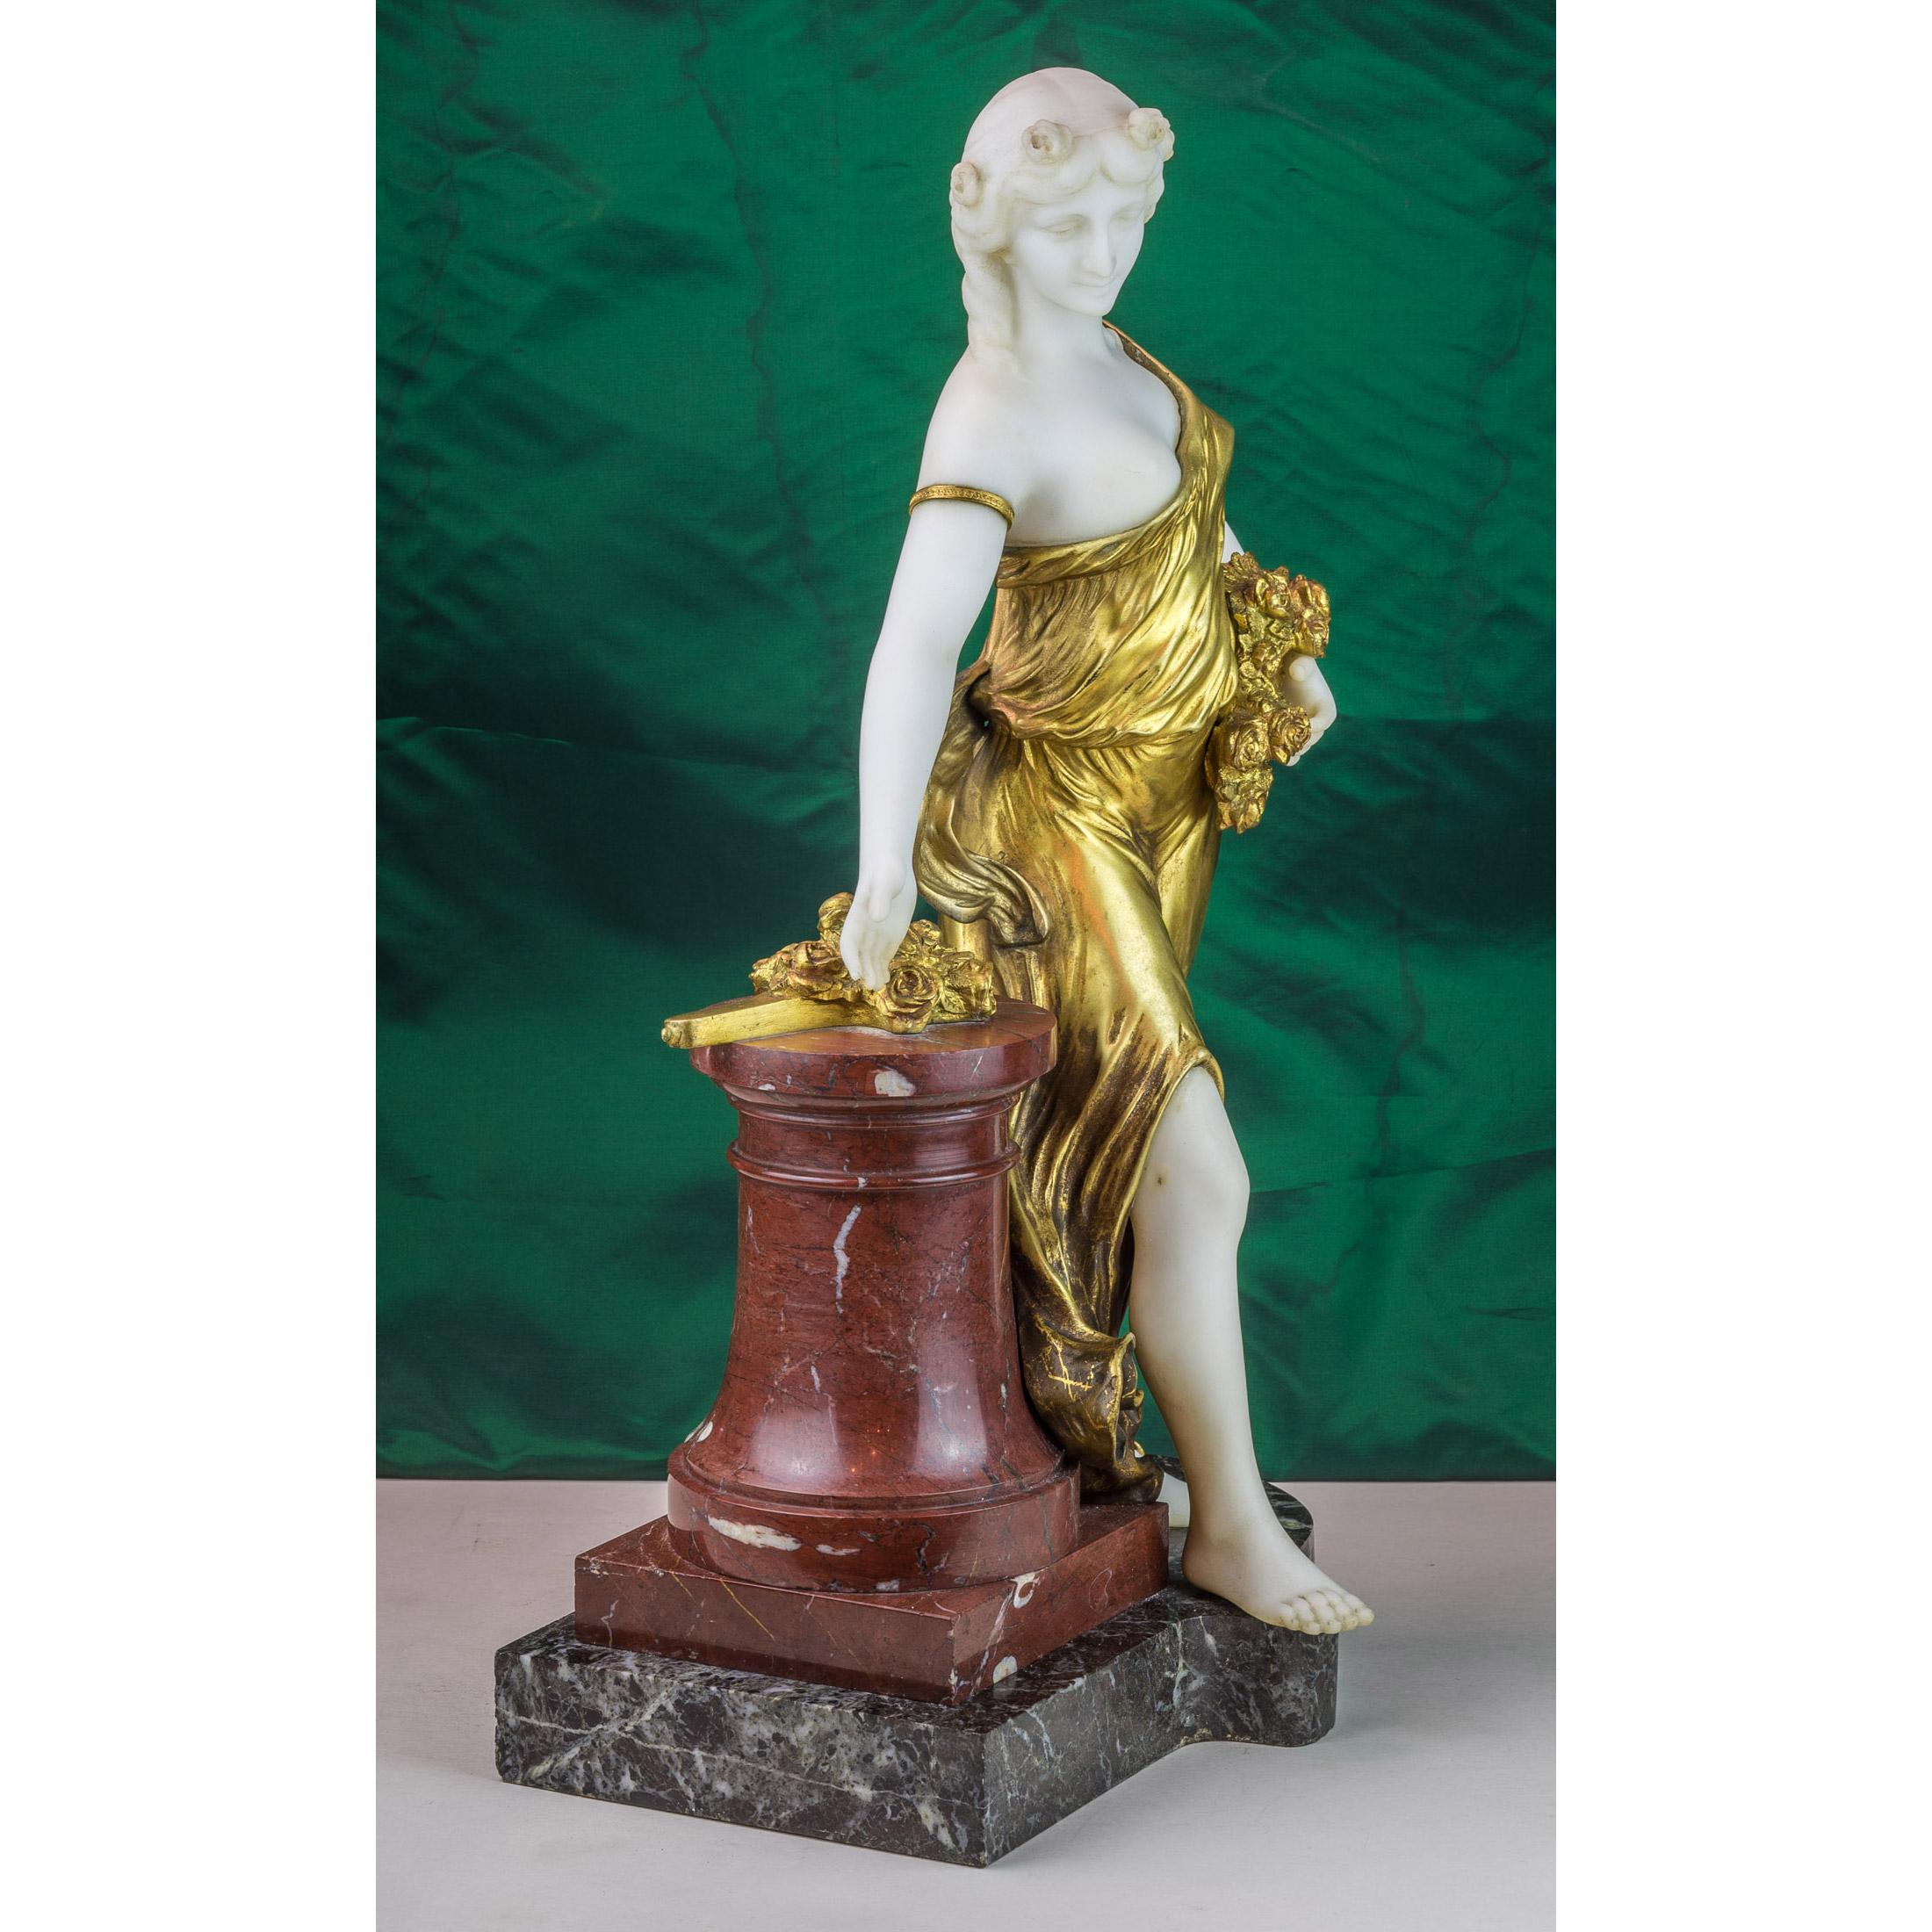 Exquisite bronze and marble figure of a woman with flowers by H. Fugère.
In gilt bronze dress leaning on a marble column with flowers in her hand, on a shaped marble base.
Artist: Henri Fugère (1872-1944)
Date: circa 1900
Origin: French
Size: 21 in